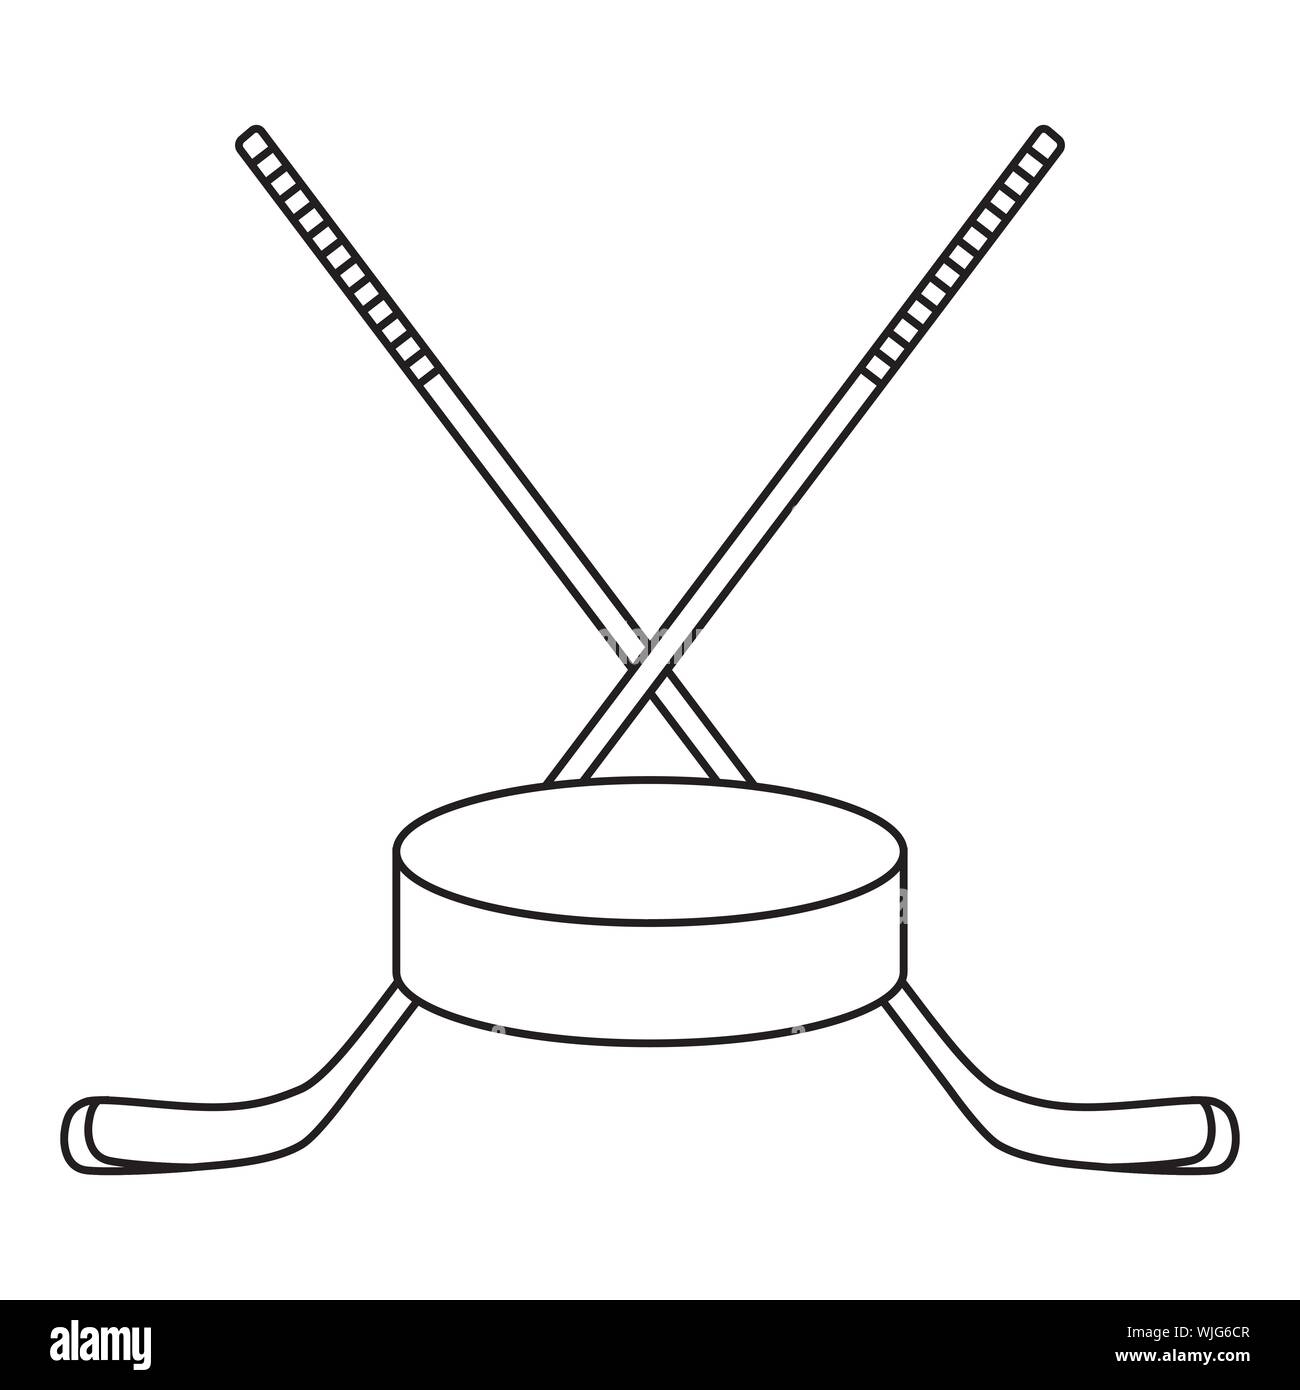 3,097 Crossed Hockey Sticks Images, Stock Photos, 3D objects